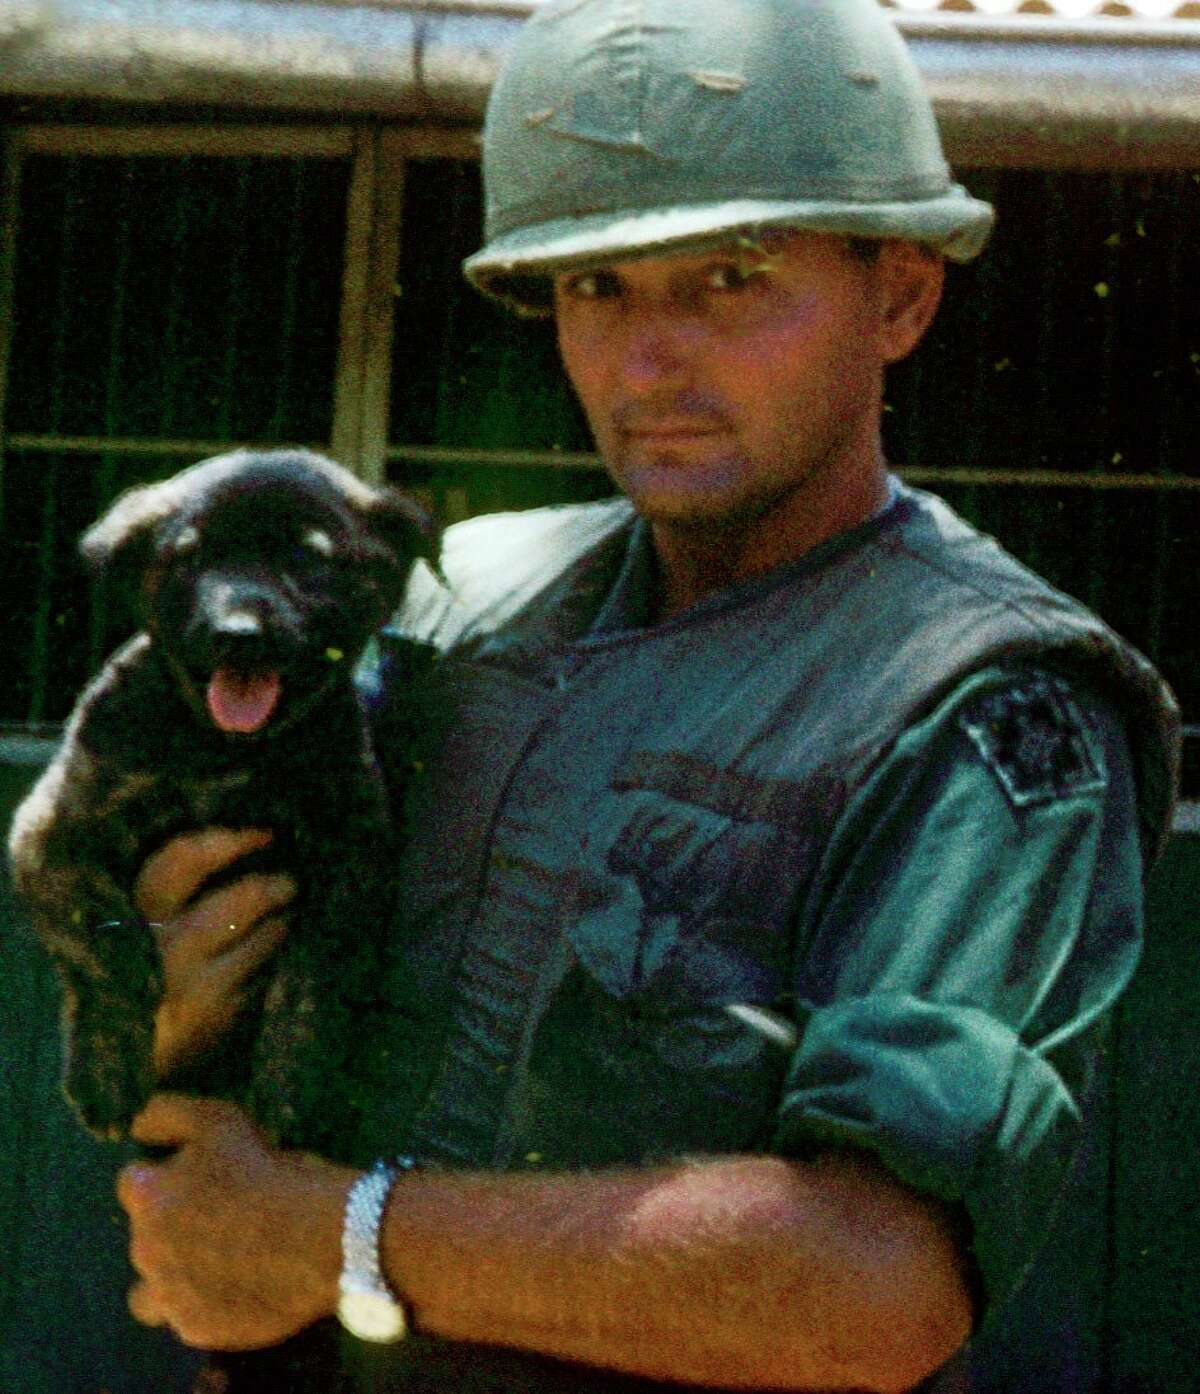 This is Builder, the puppy rescued after a mortar attack in Rach Kein made him an orphan. Captain Michael Miller adopted Builder and they were inseparable. Builder saved the captain's life in a mortar attack. (Photo provided)